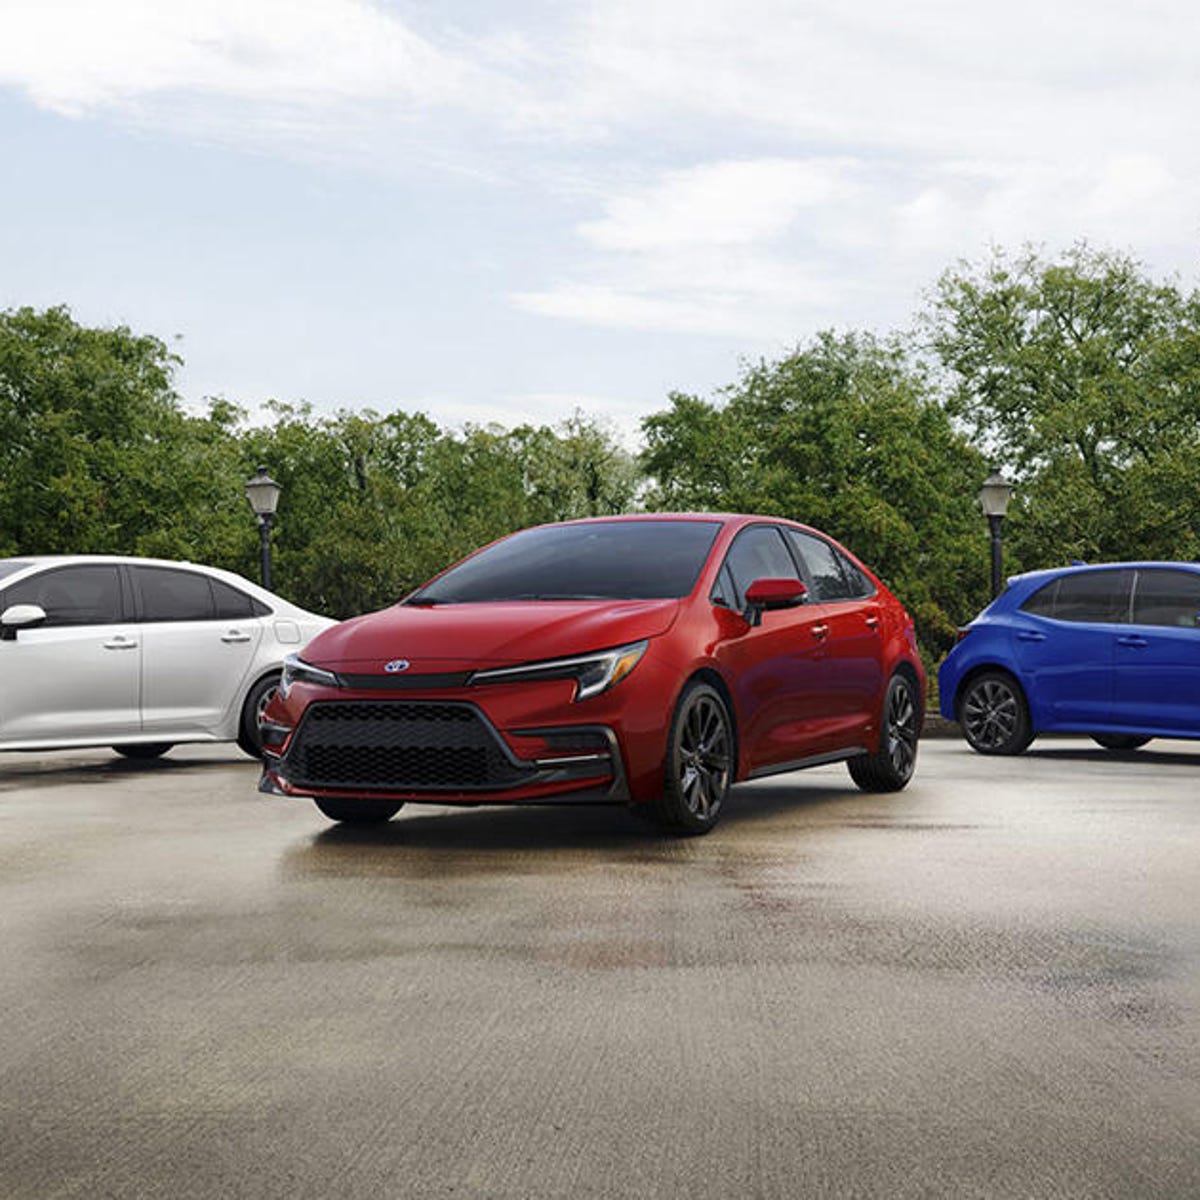 2023 Toyota Corolla Updates Include AWD for Hybrid, Improved